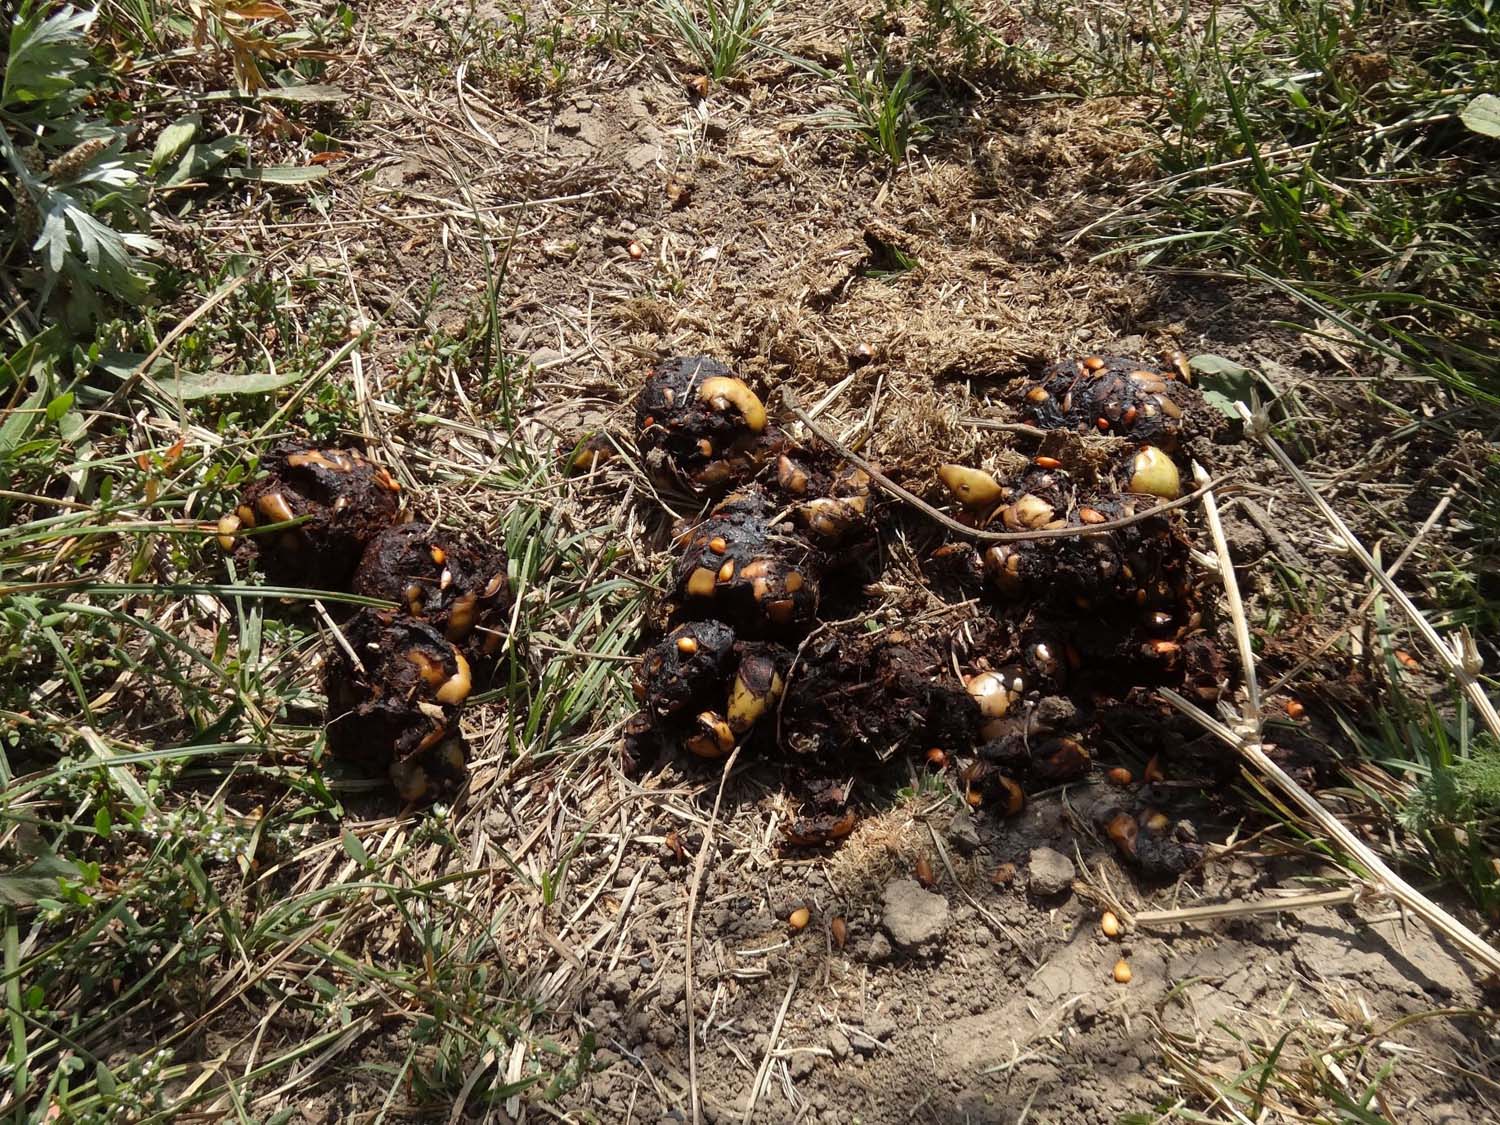 bear poo - the closest we would get to them. There was lots of poo around